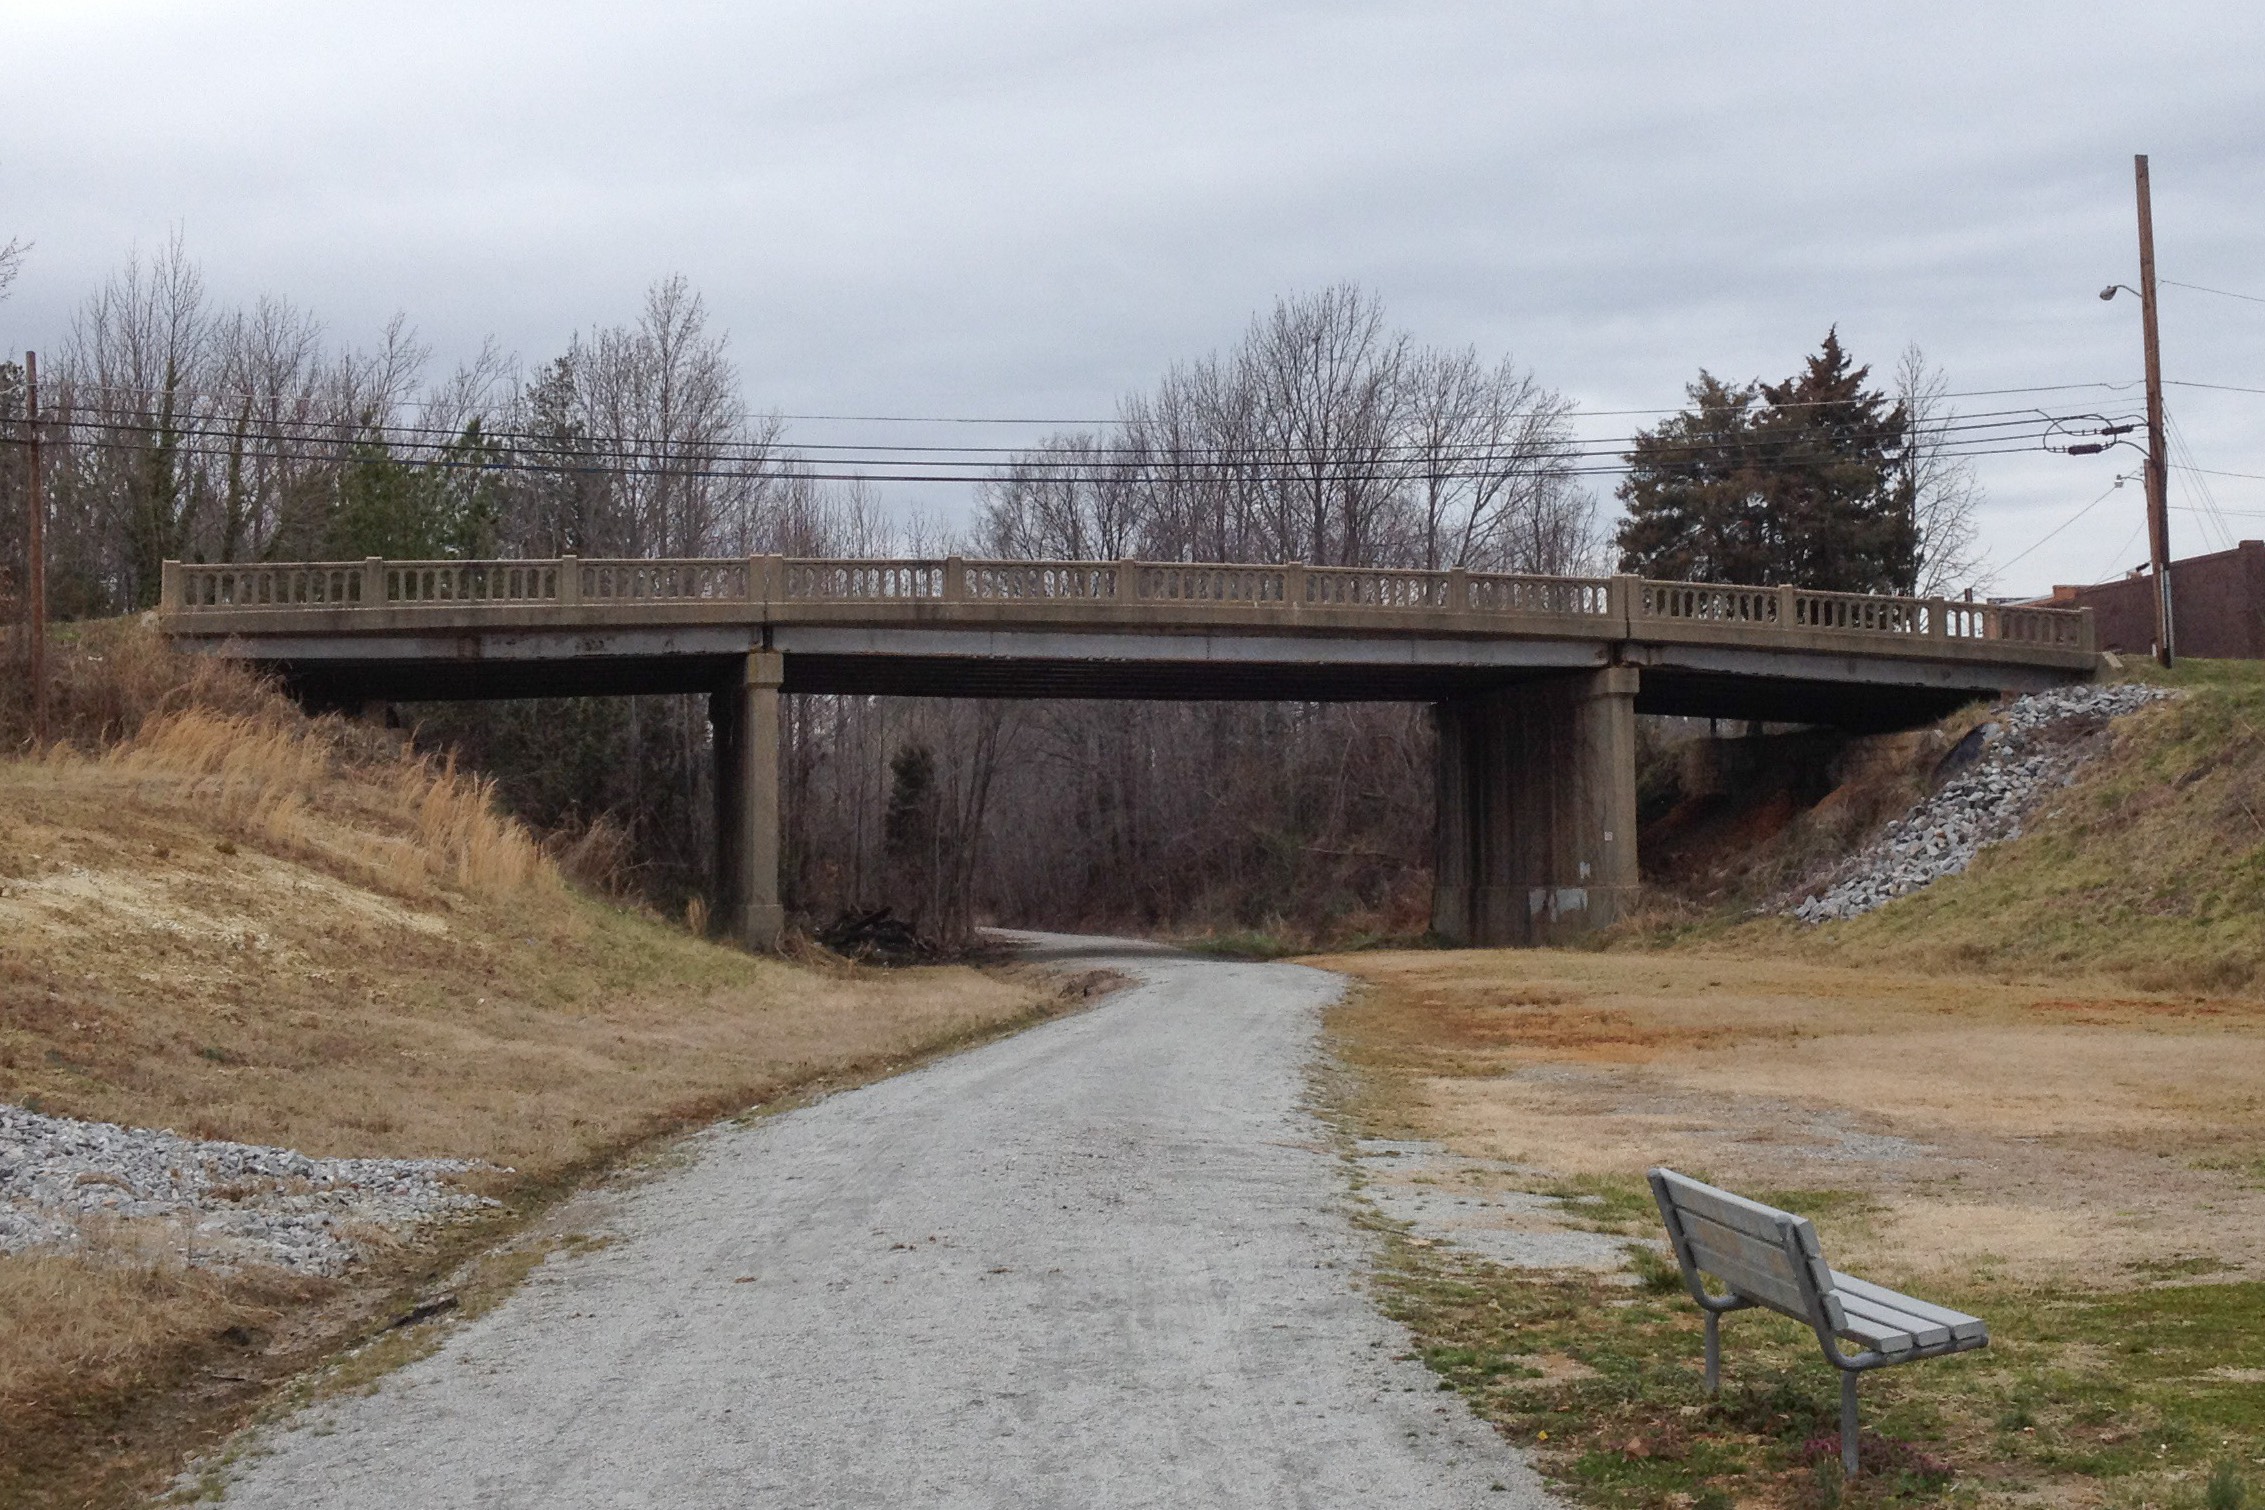 The former bridge over the old railroad right-of-way in Victoria, Virginia (located just behind the office of the municipal lawyers at Hawthorne & Hawthorne).